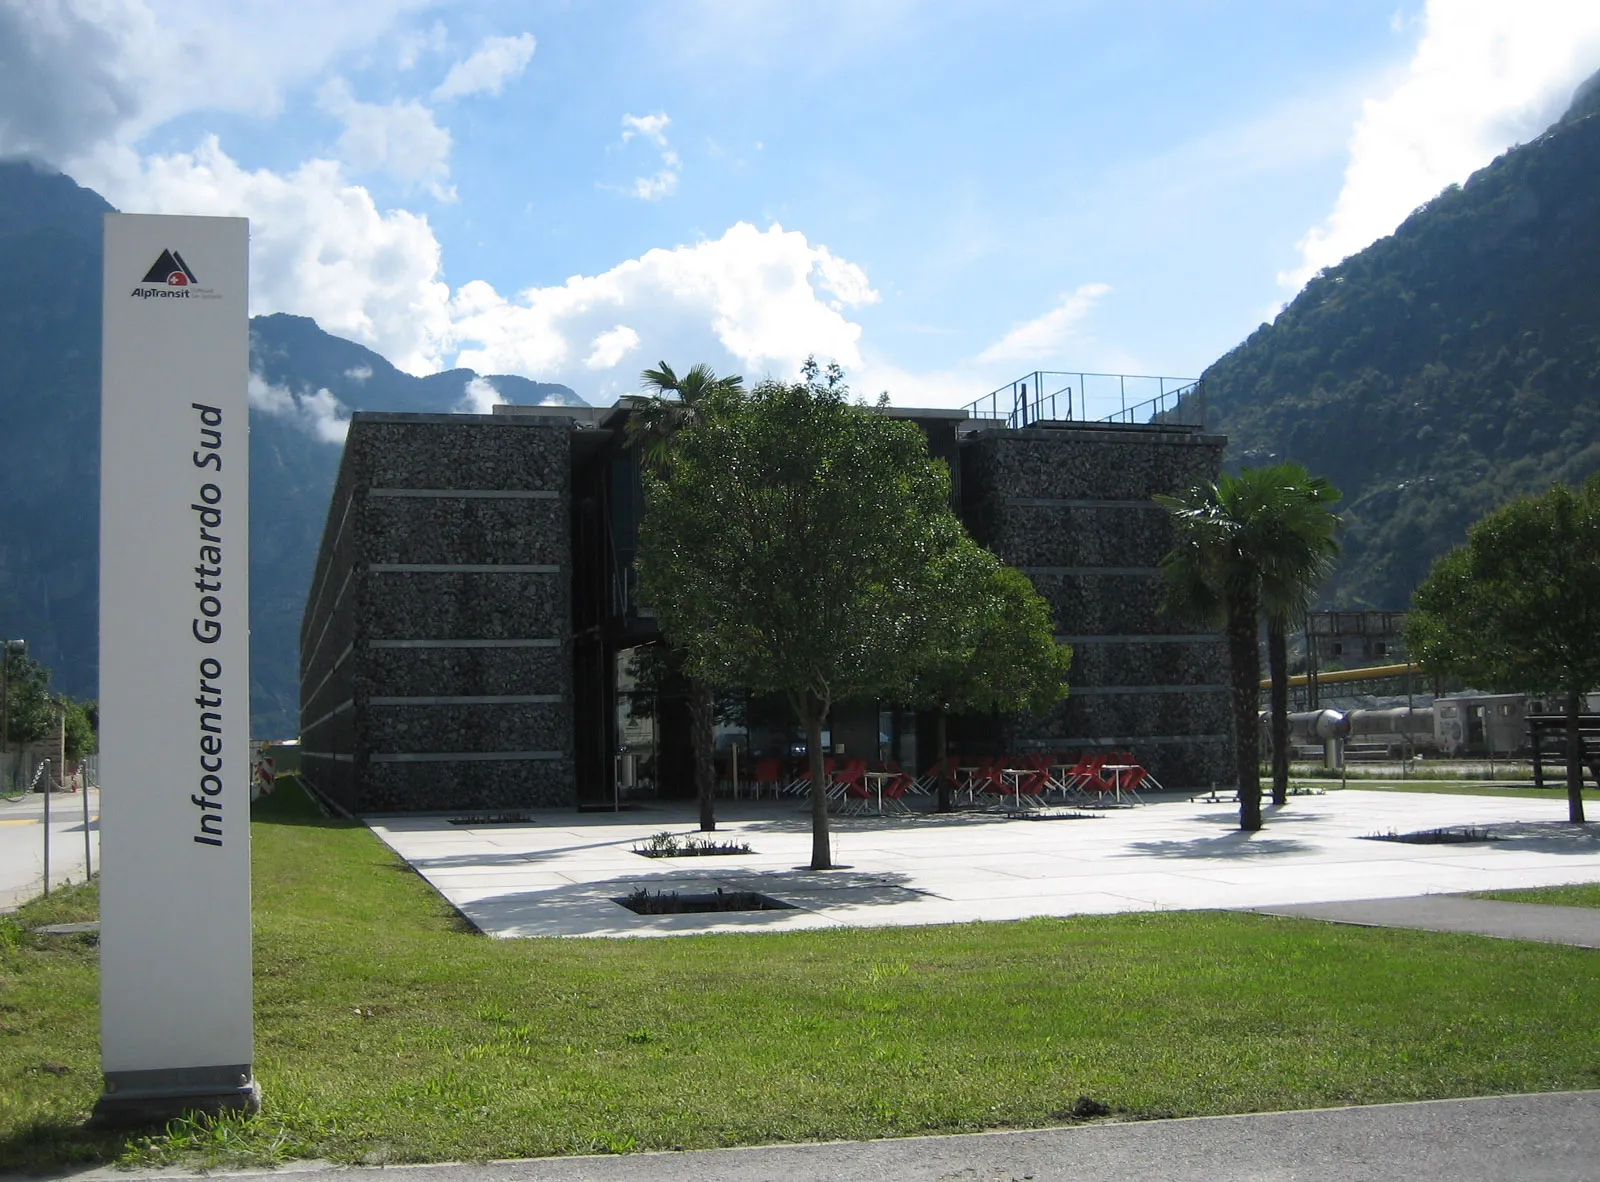 Photo showing: Visitors center in Bodio-Pollegio of the Gotthard Base Tunnel, Canton Ticino, Switzerland (ital.: Alptransit Infocentro Gottardo Sud).
The outer structure is filled with soil excavated by the two tunnel boring machines.